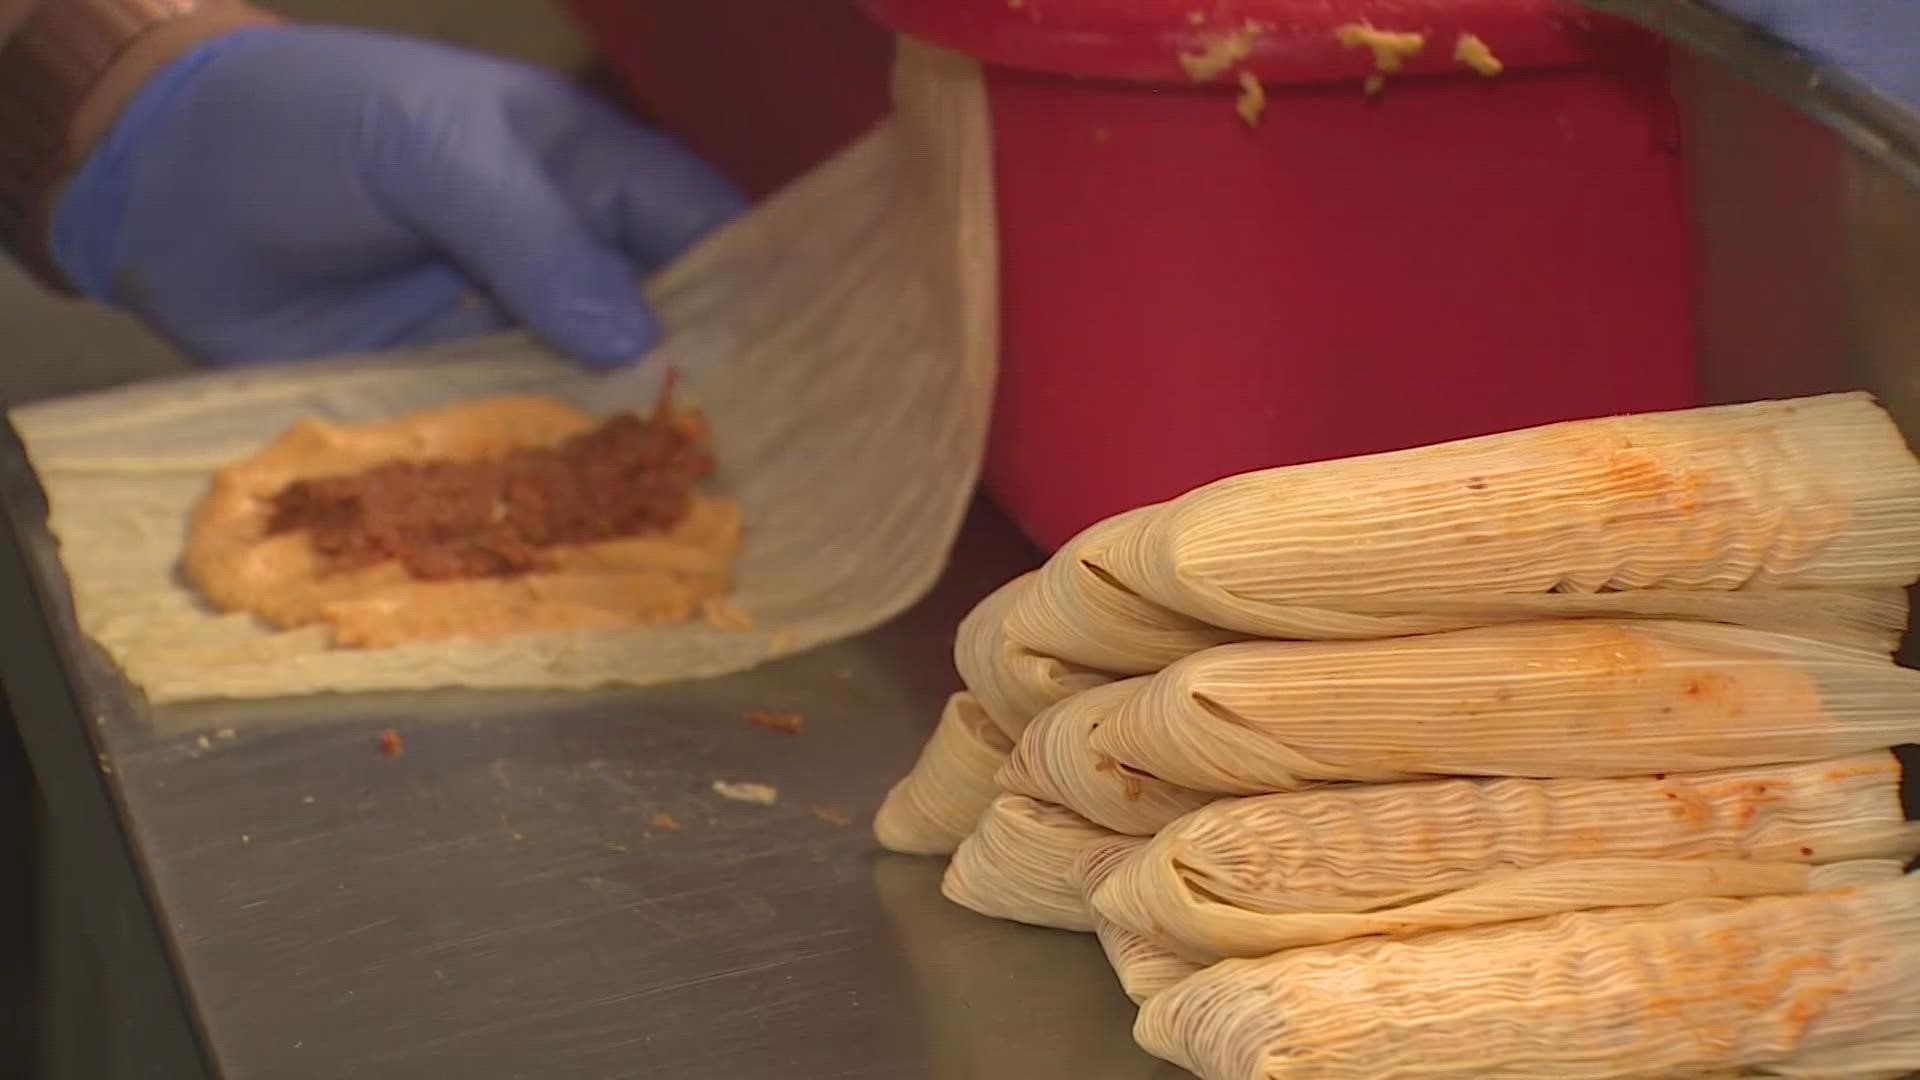 There's been talk of a big price increase for tamales in Central Texas, but Houston tamale makers say it's not happening here.